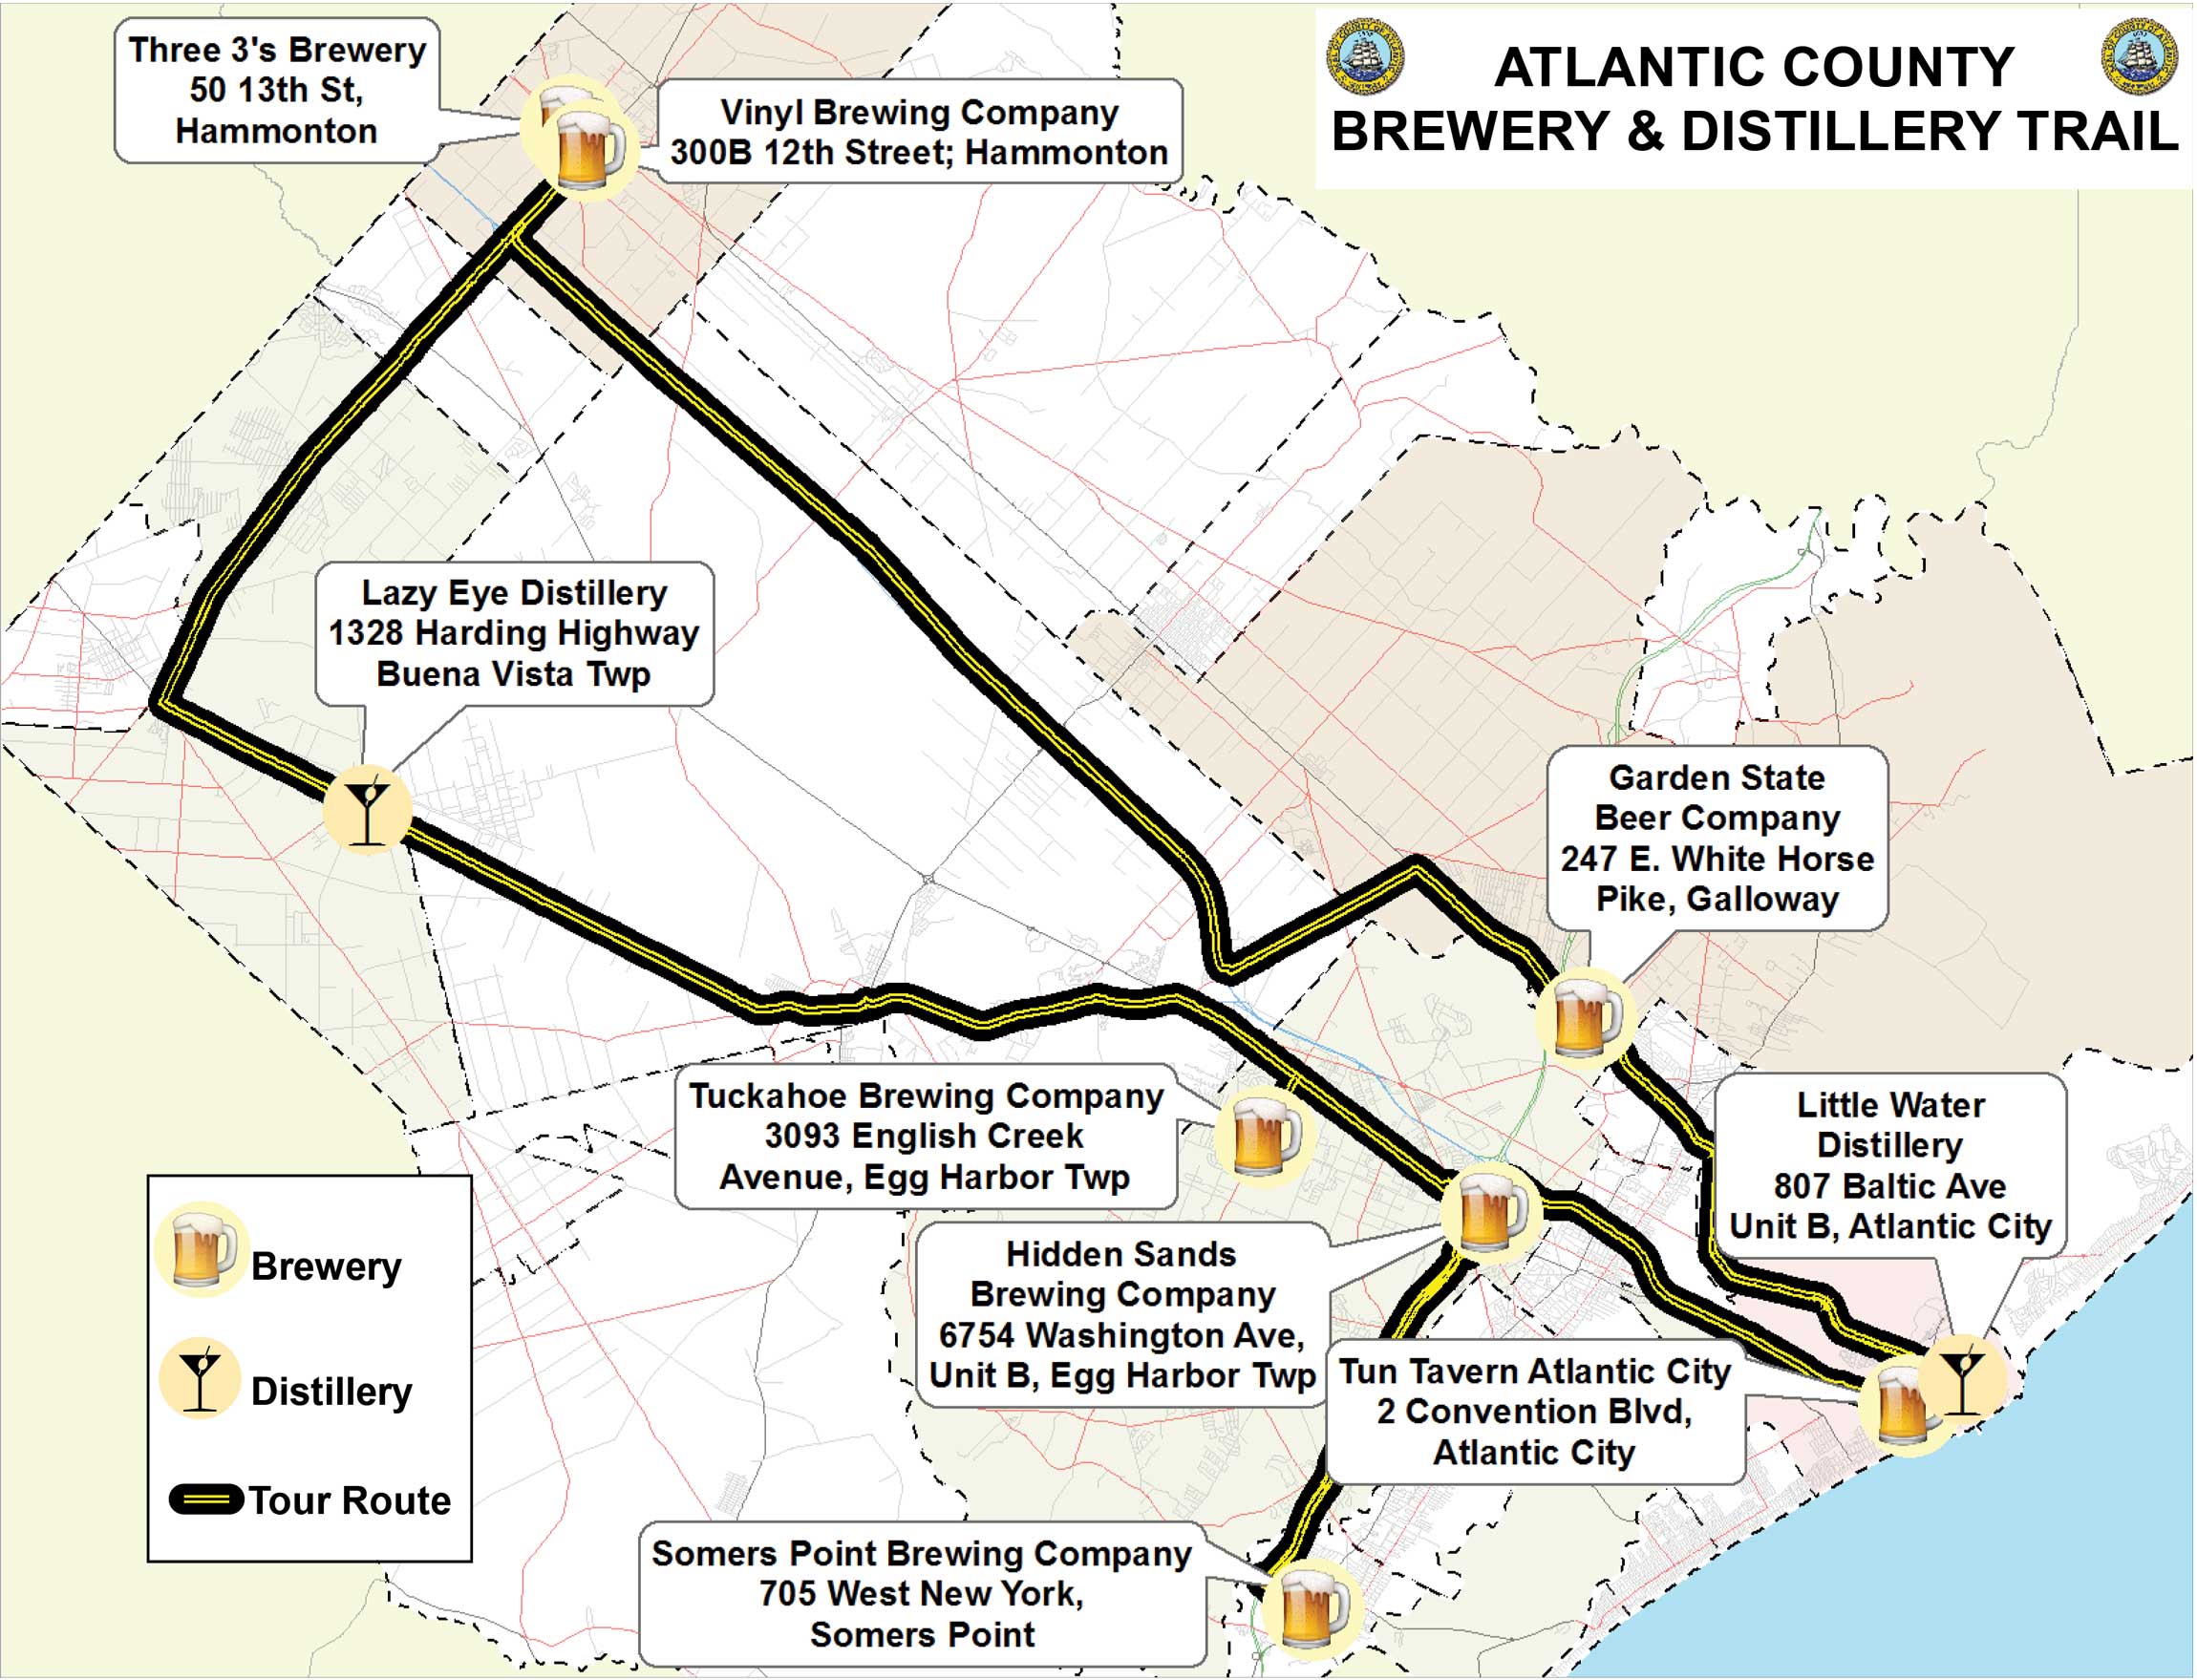 Atlantic County Brewery & Distillery Trail
Map shows a round "trail" to take to hit all of the breweries and distilleries in Atlantic County.